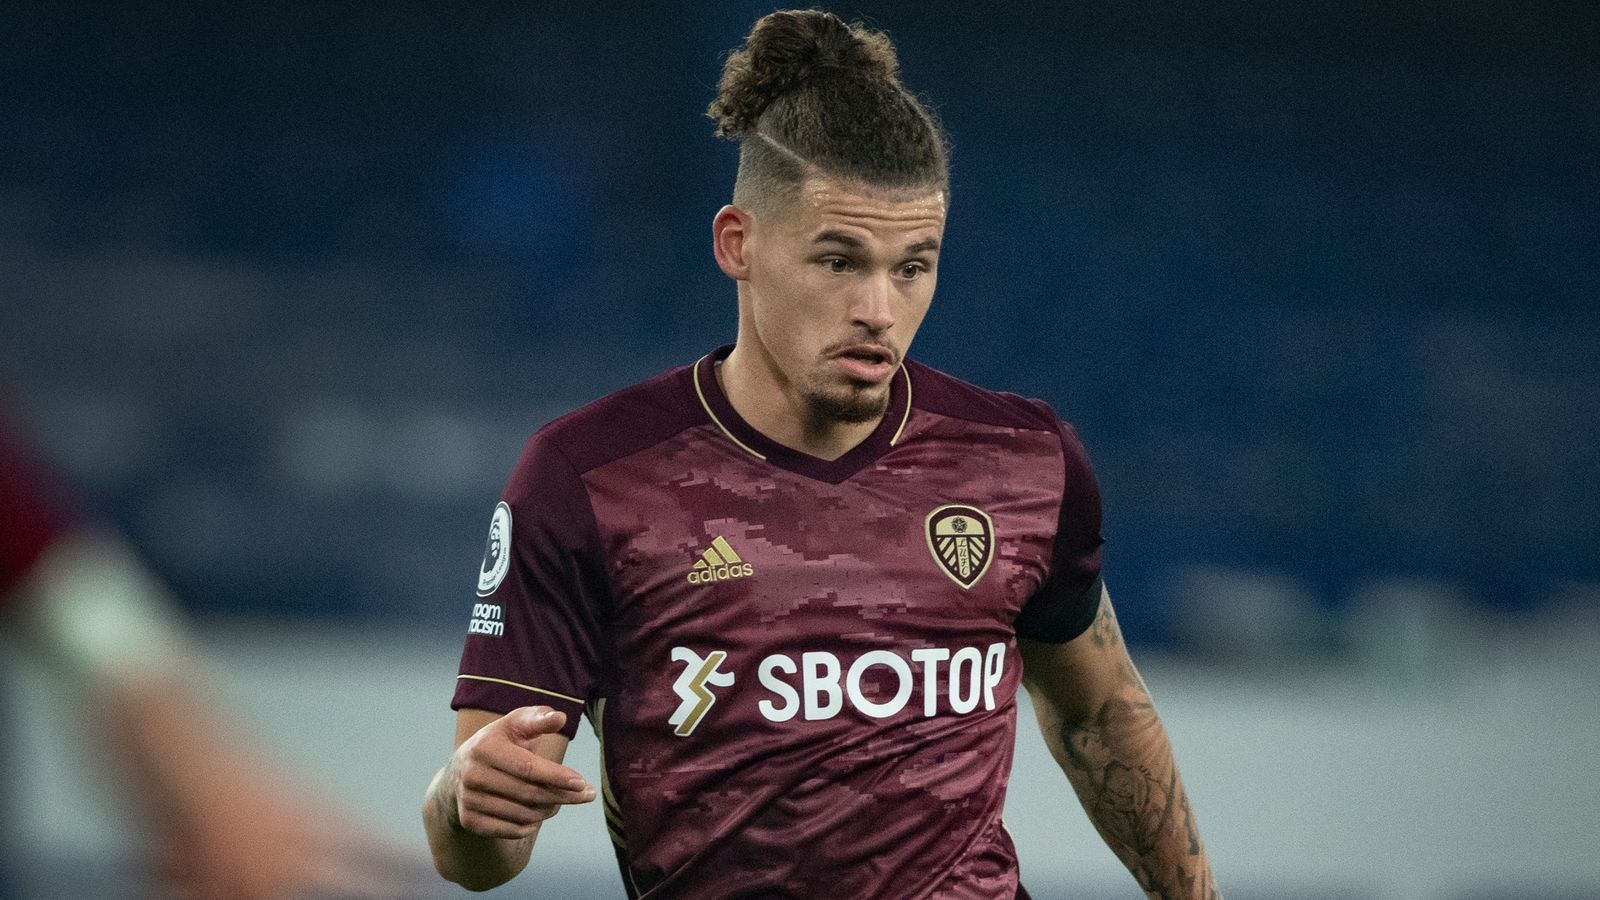 Chelsea must stop Kalvin Phillips if they are to beat Leeds, says Jamie Carragher